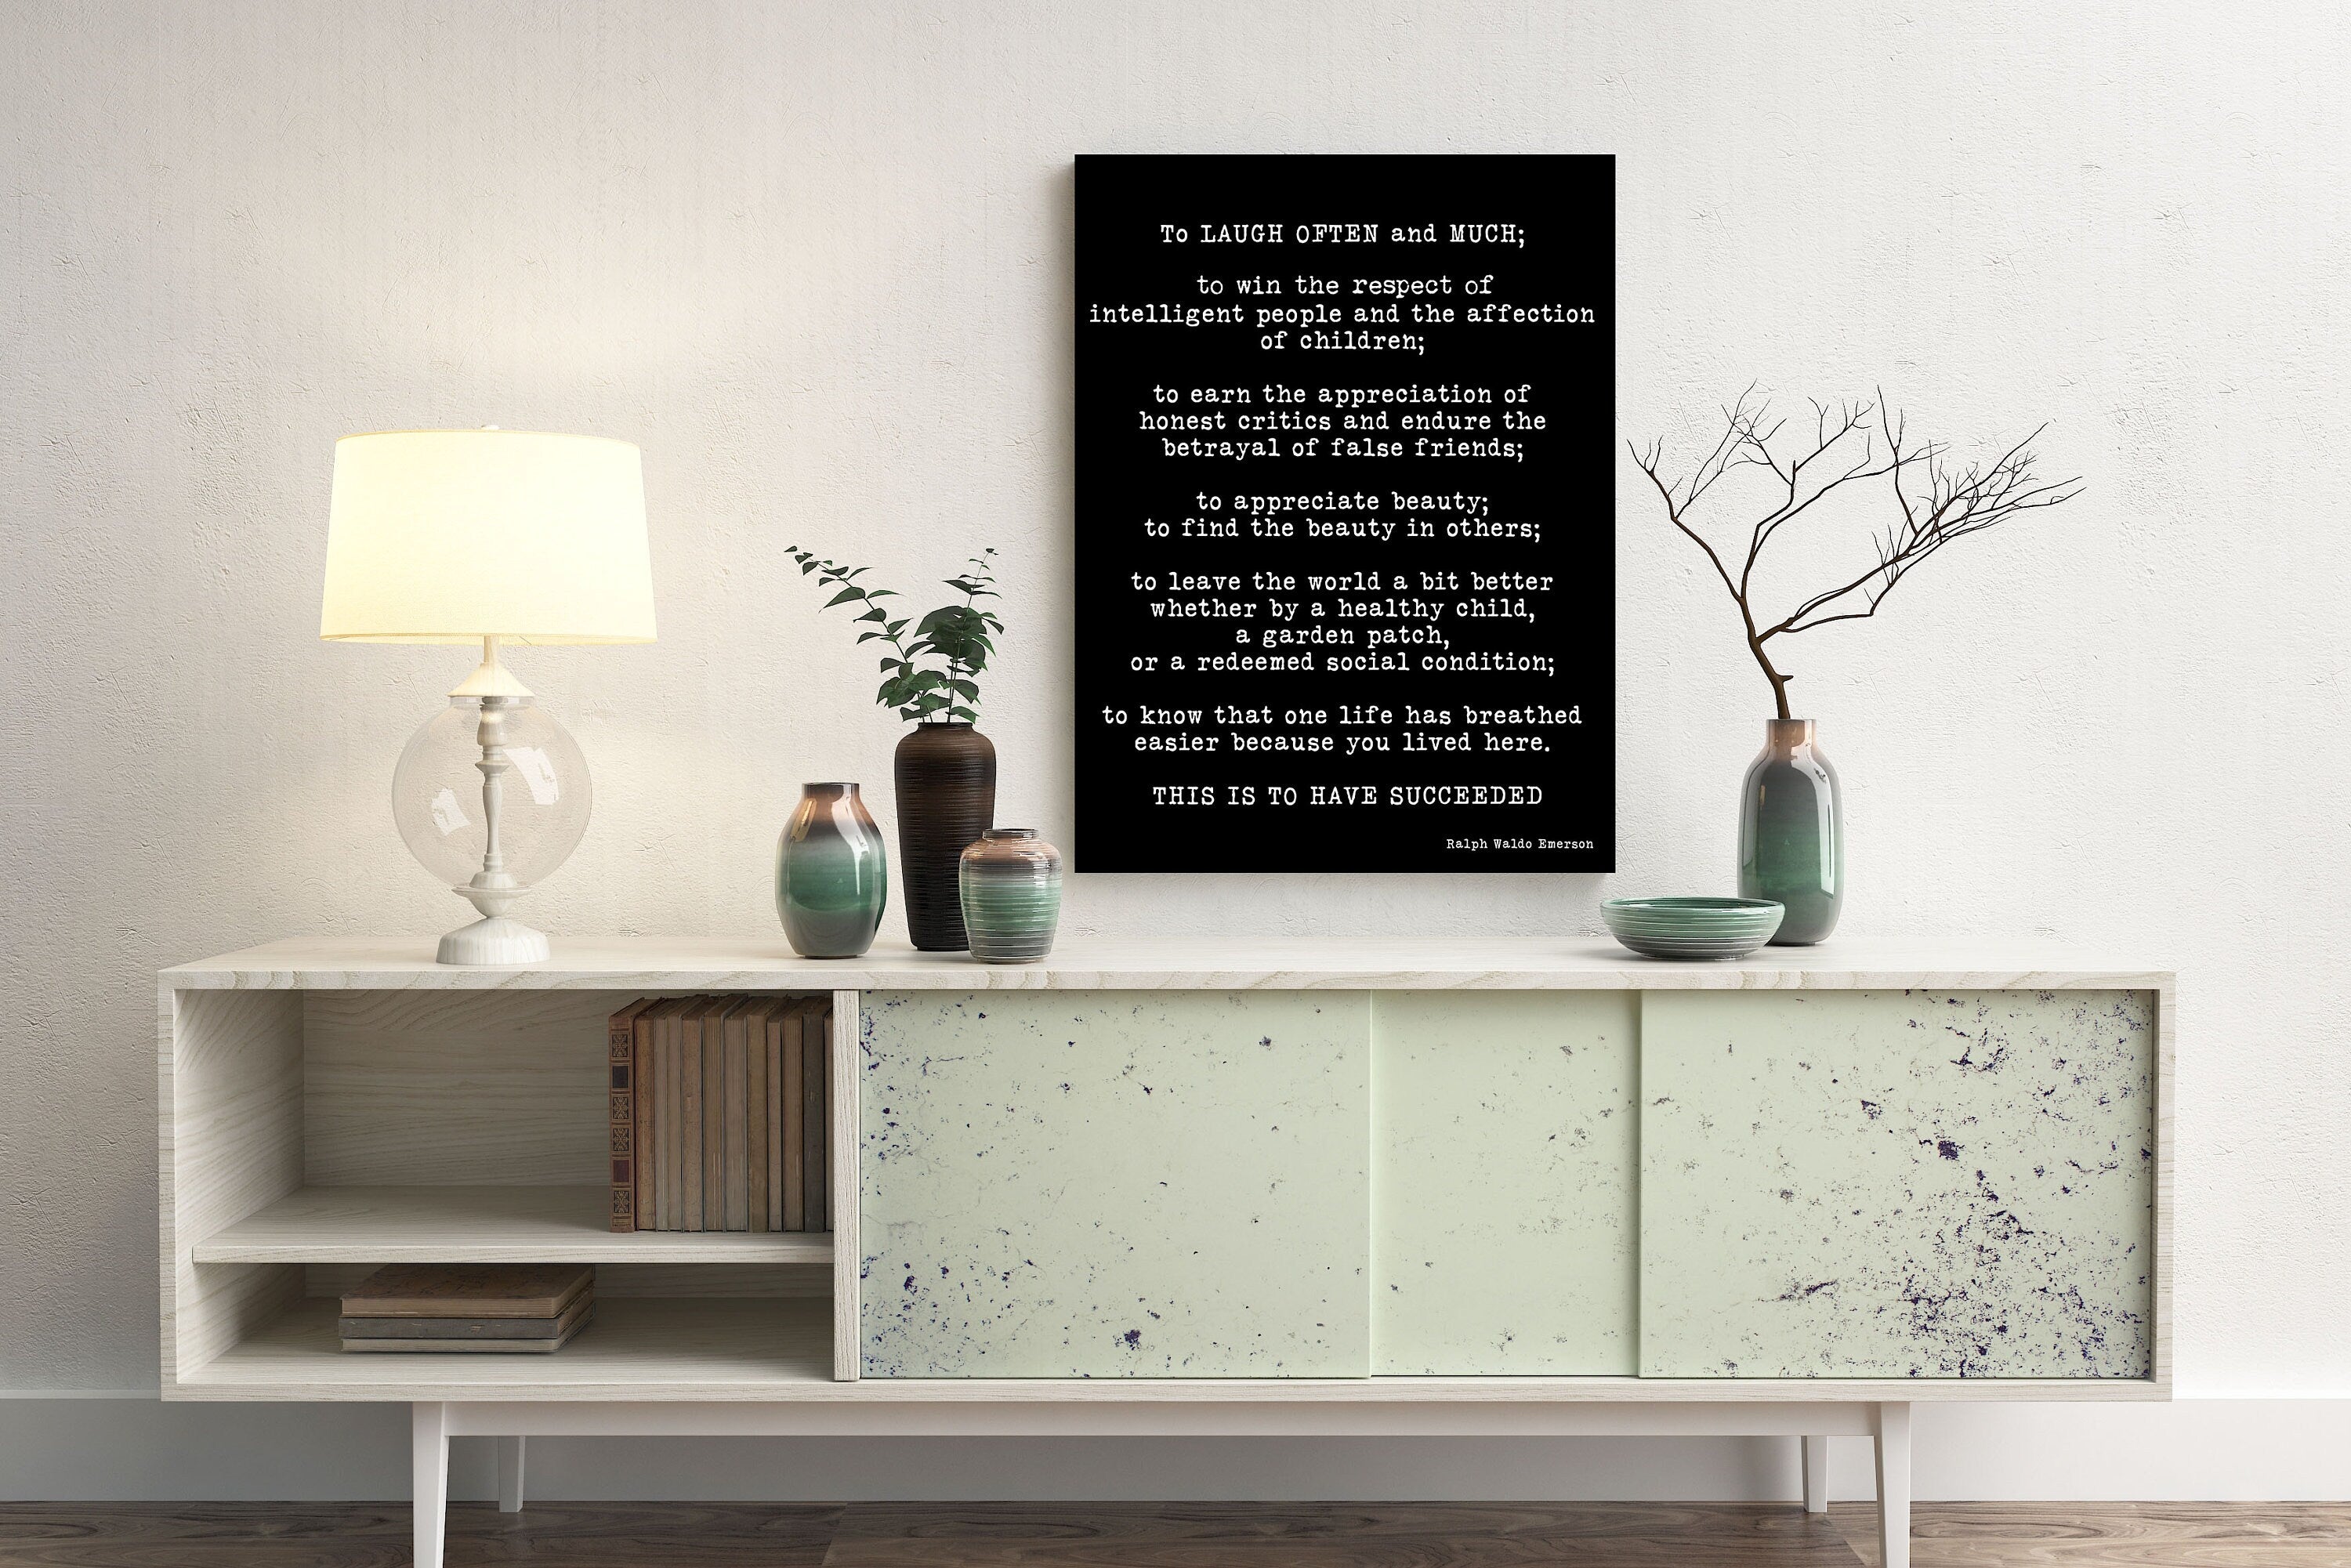 Ralph Waldo Emerson Black & White Wall Art Quote Print - To Laugh Often And Much Unframed Typography Print